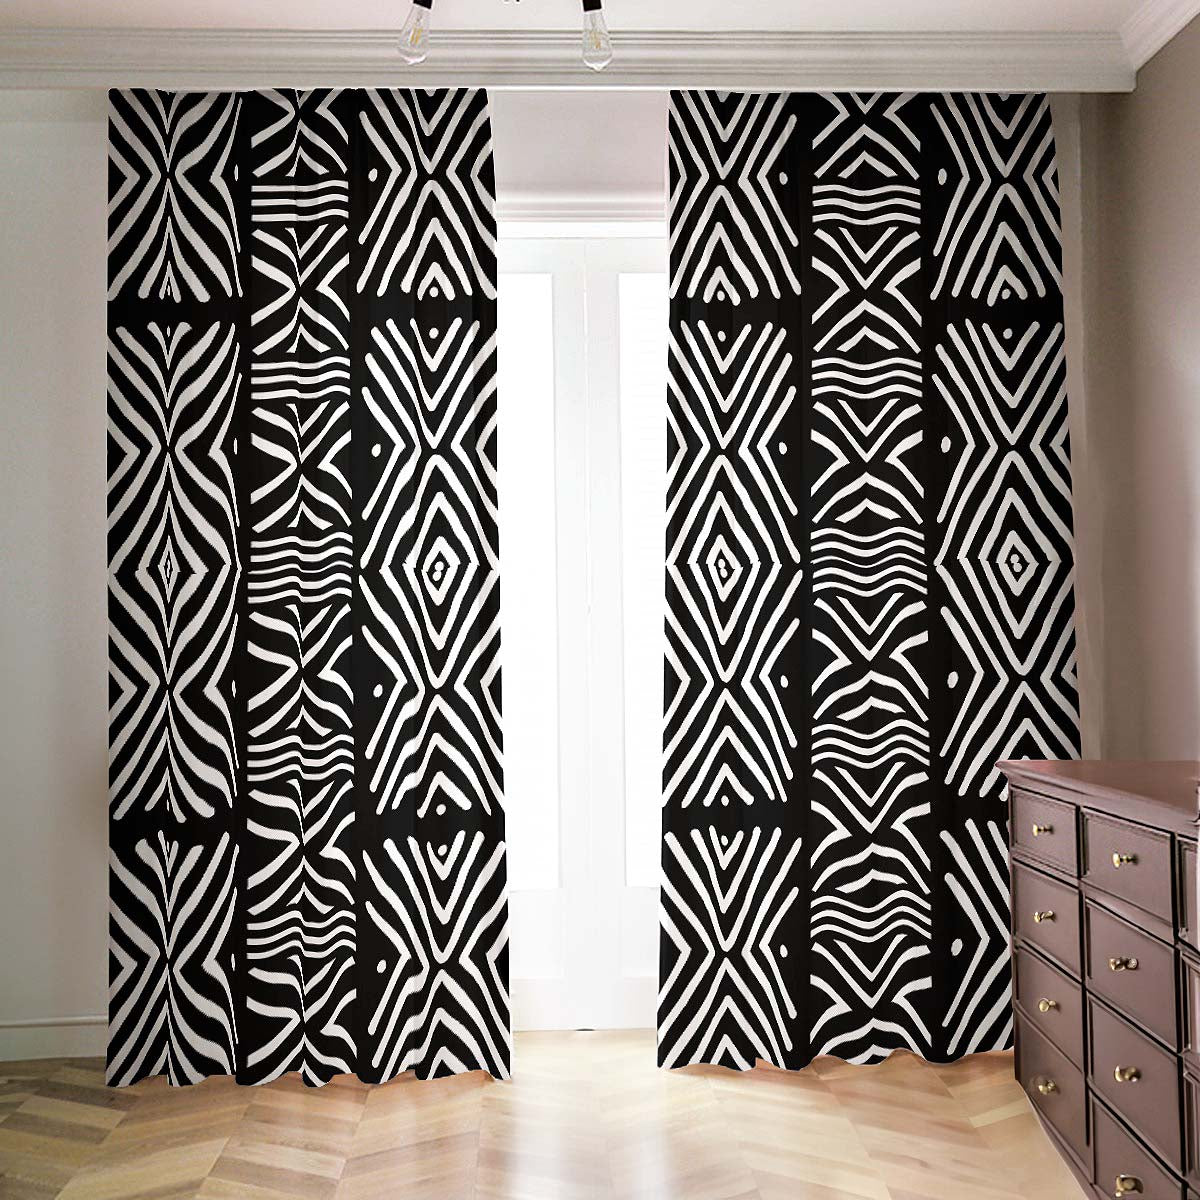 African Print Blackout Curtains - Abstract Black & White